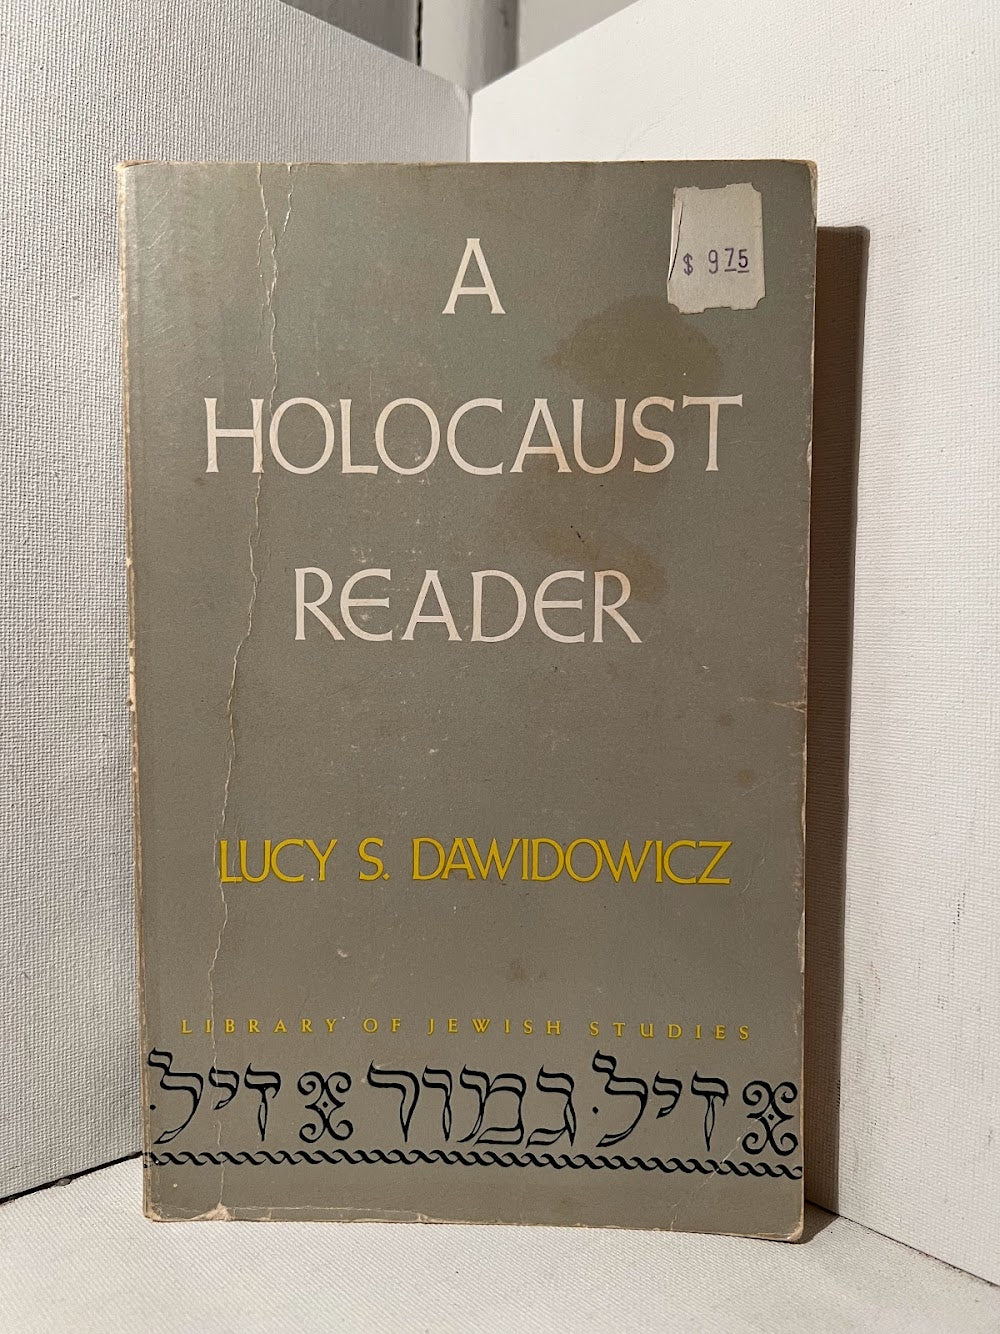 A Holocaust Reader by Lucy S. Dawidowicz